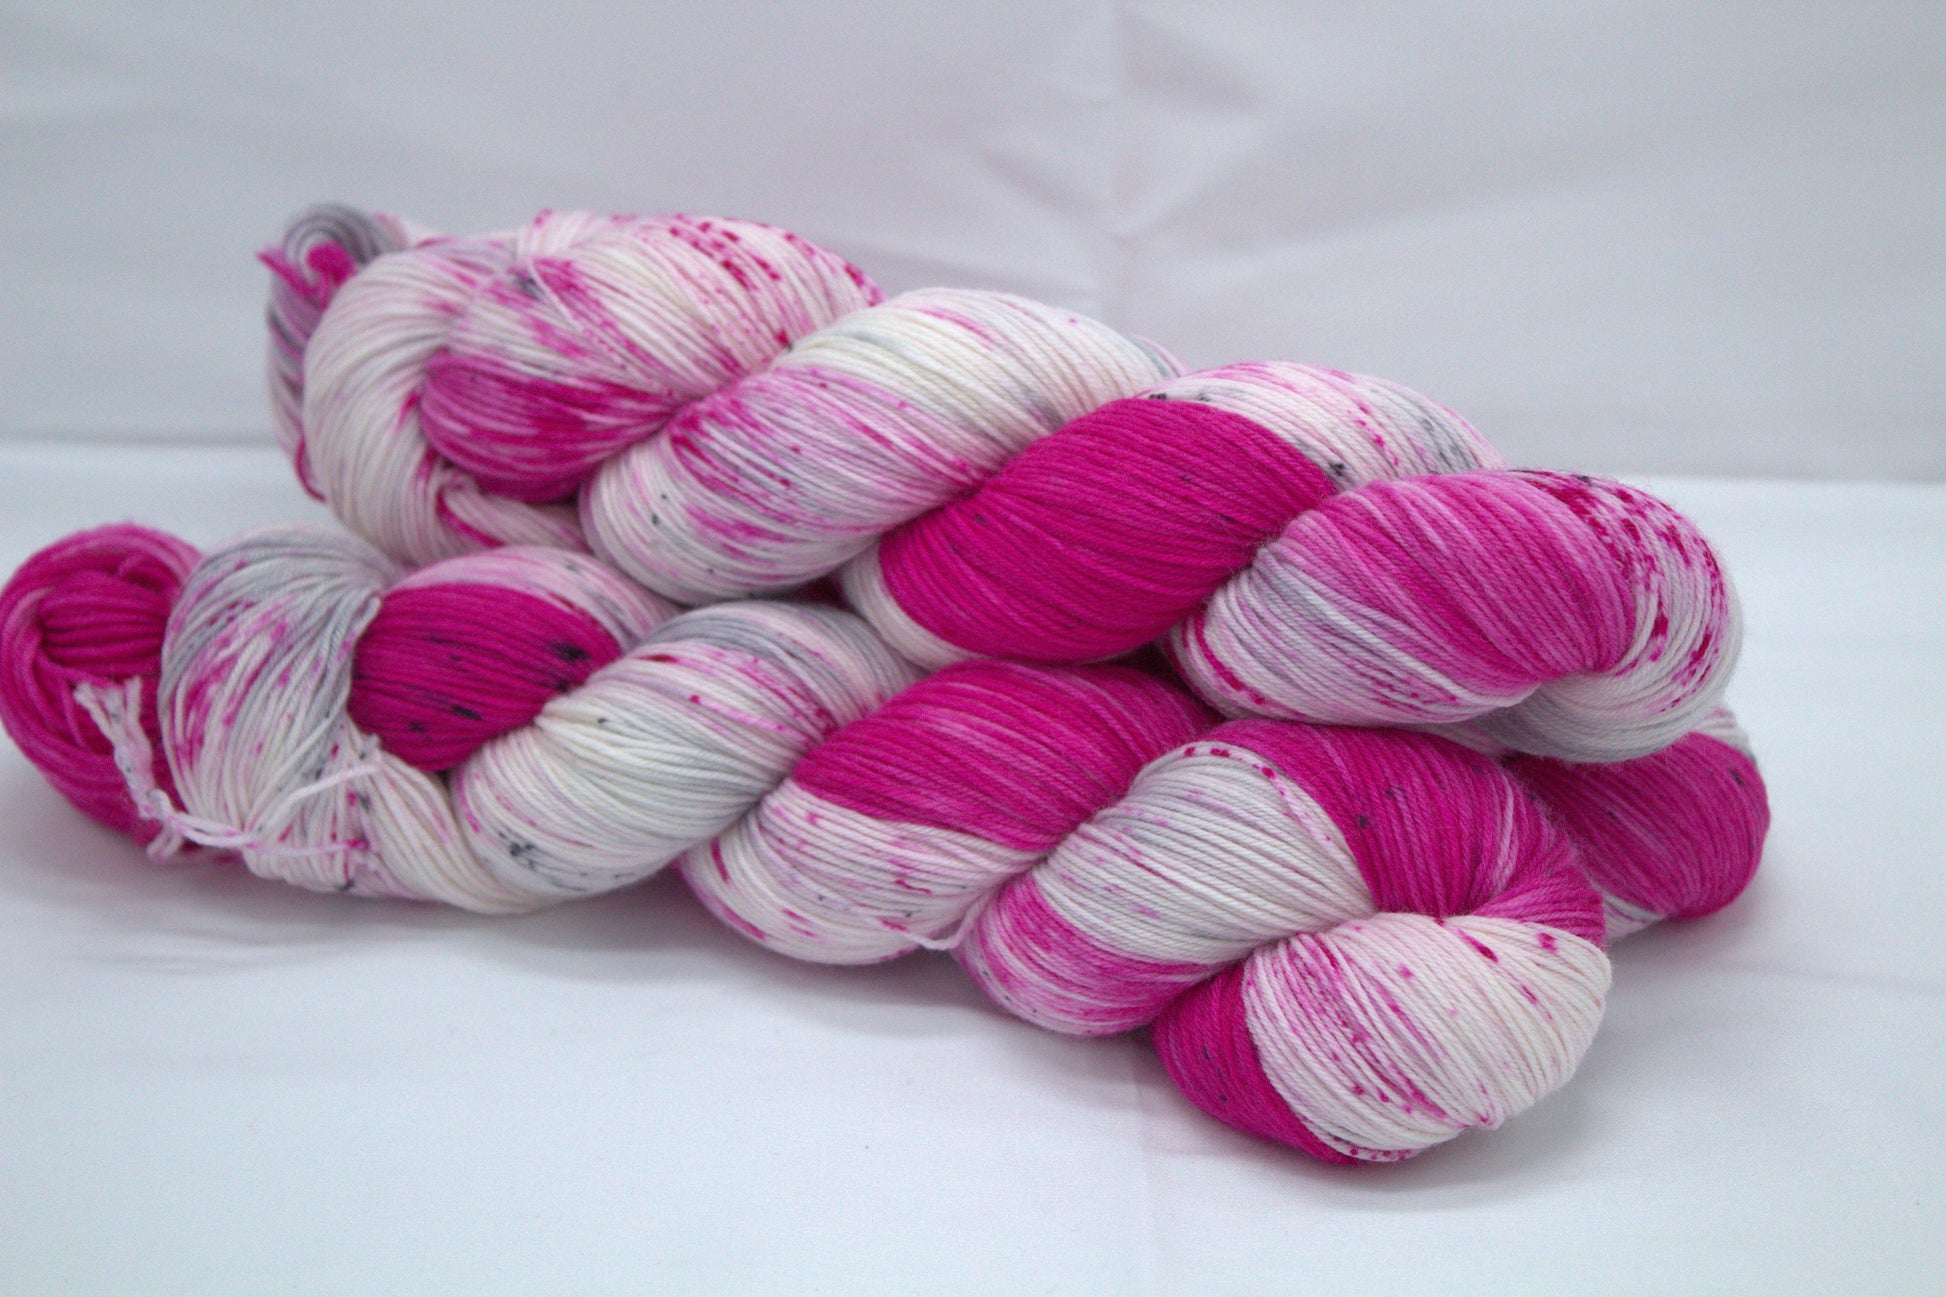 side view of three twisted skeins bright pink variegated yarn with pink and dark gray speckles on white background.